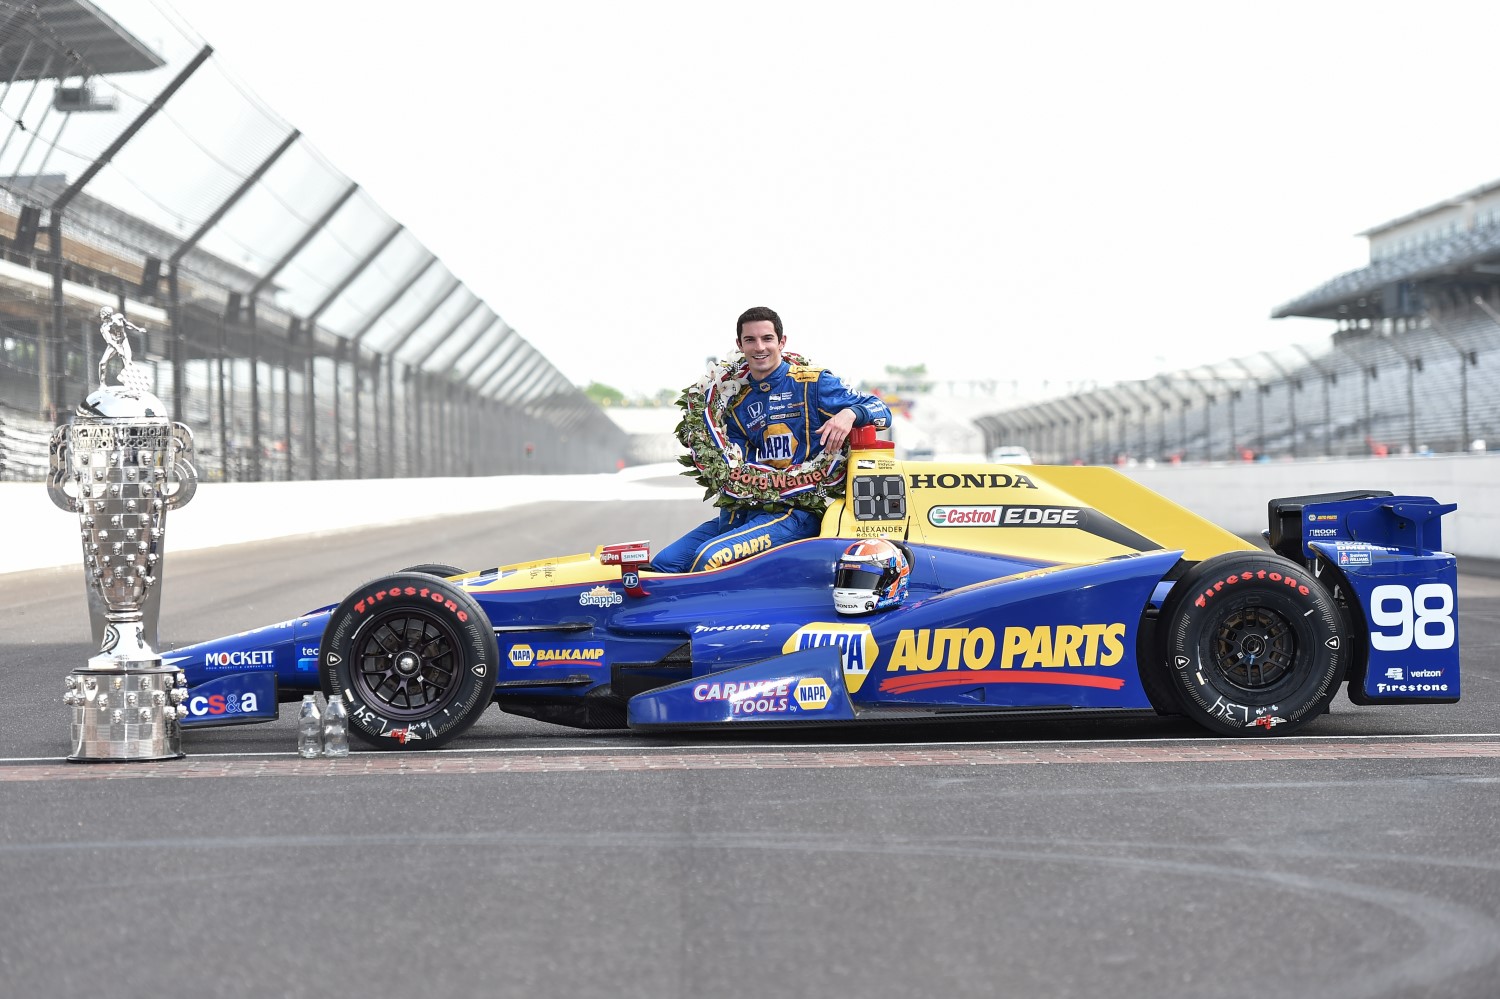 Rossi took NAPA to victory lane in the 100th running of the Indy 500